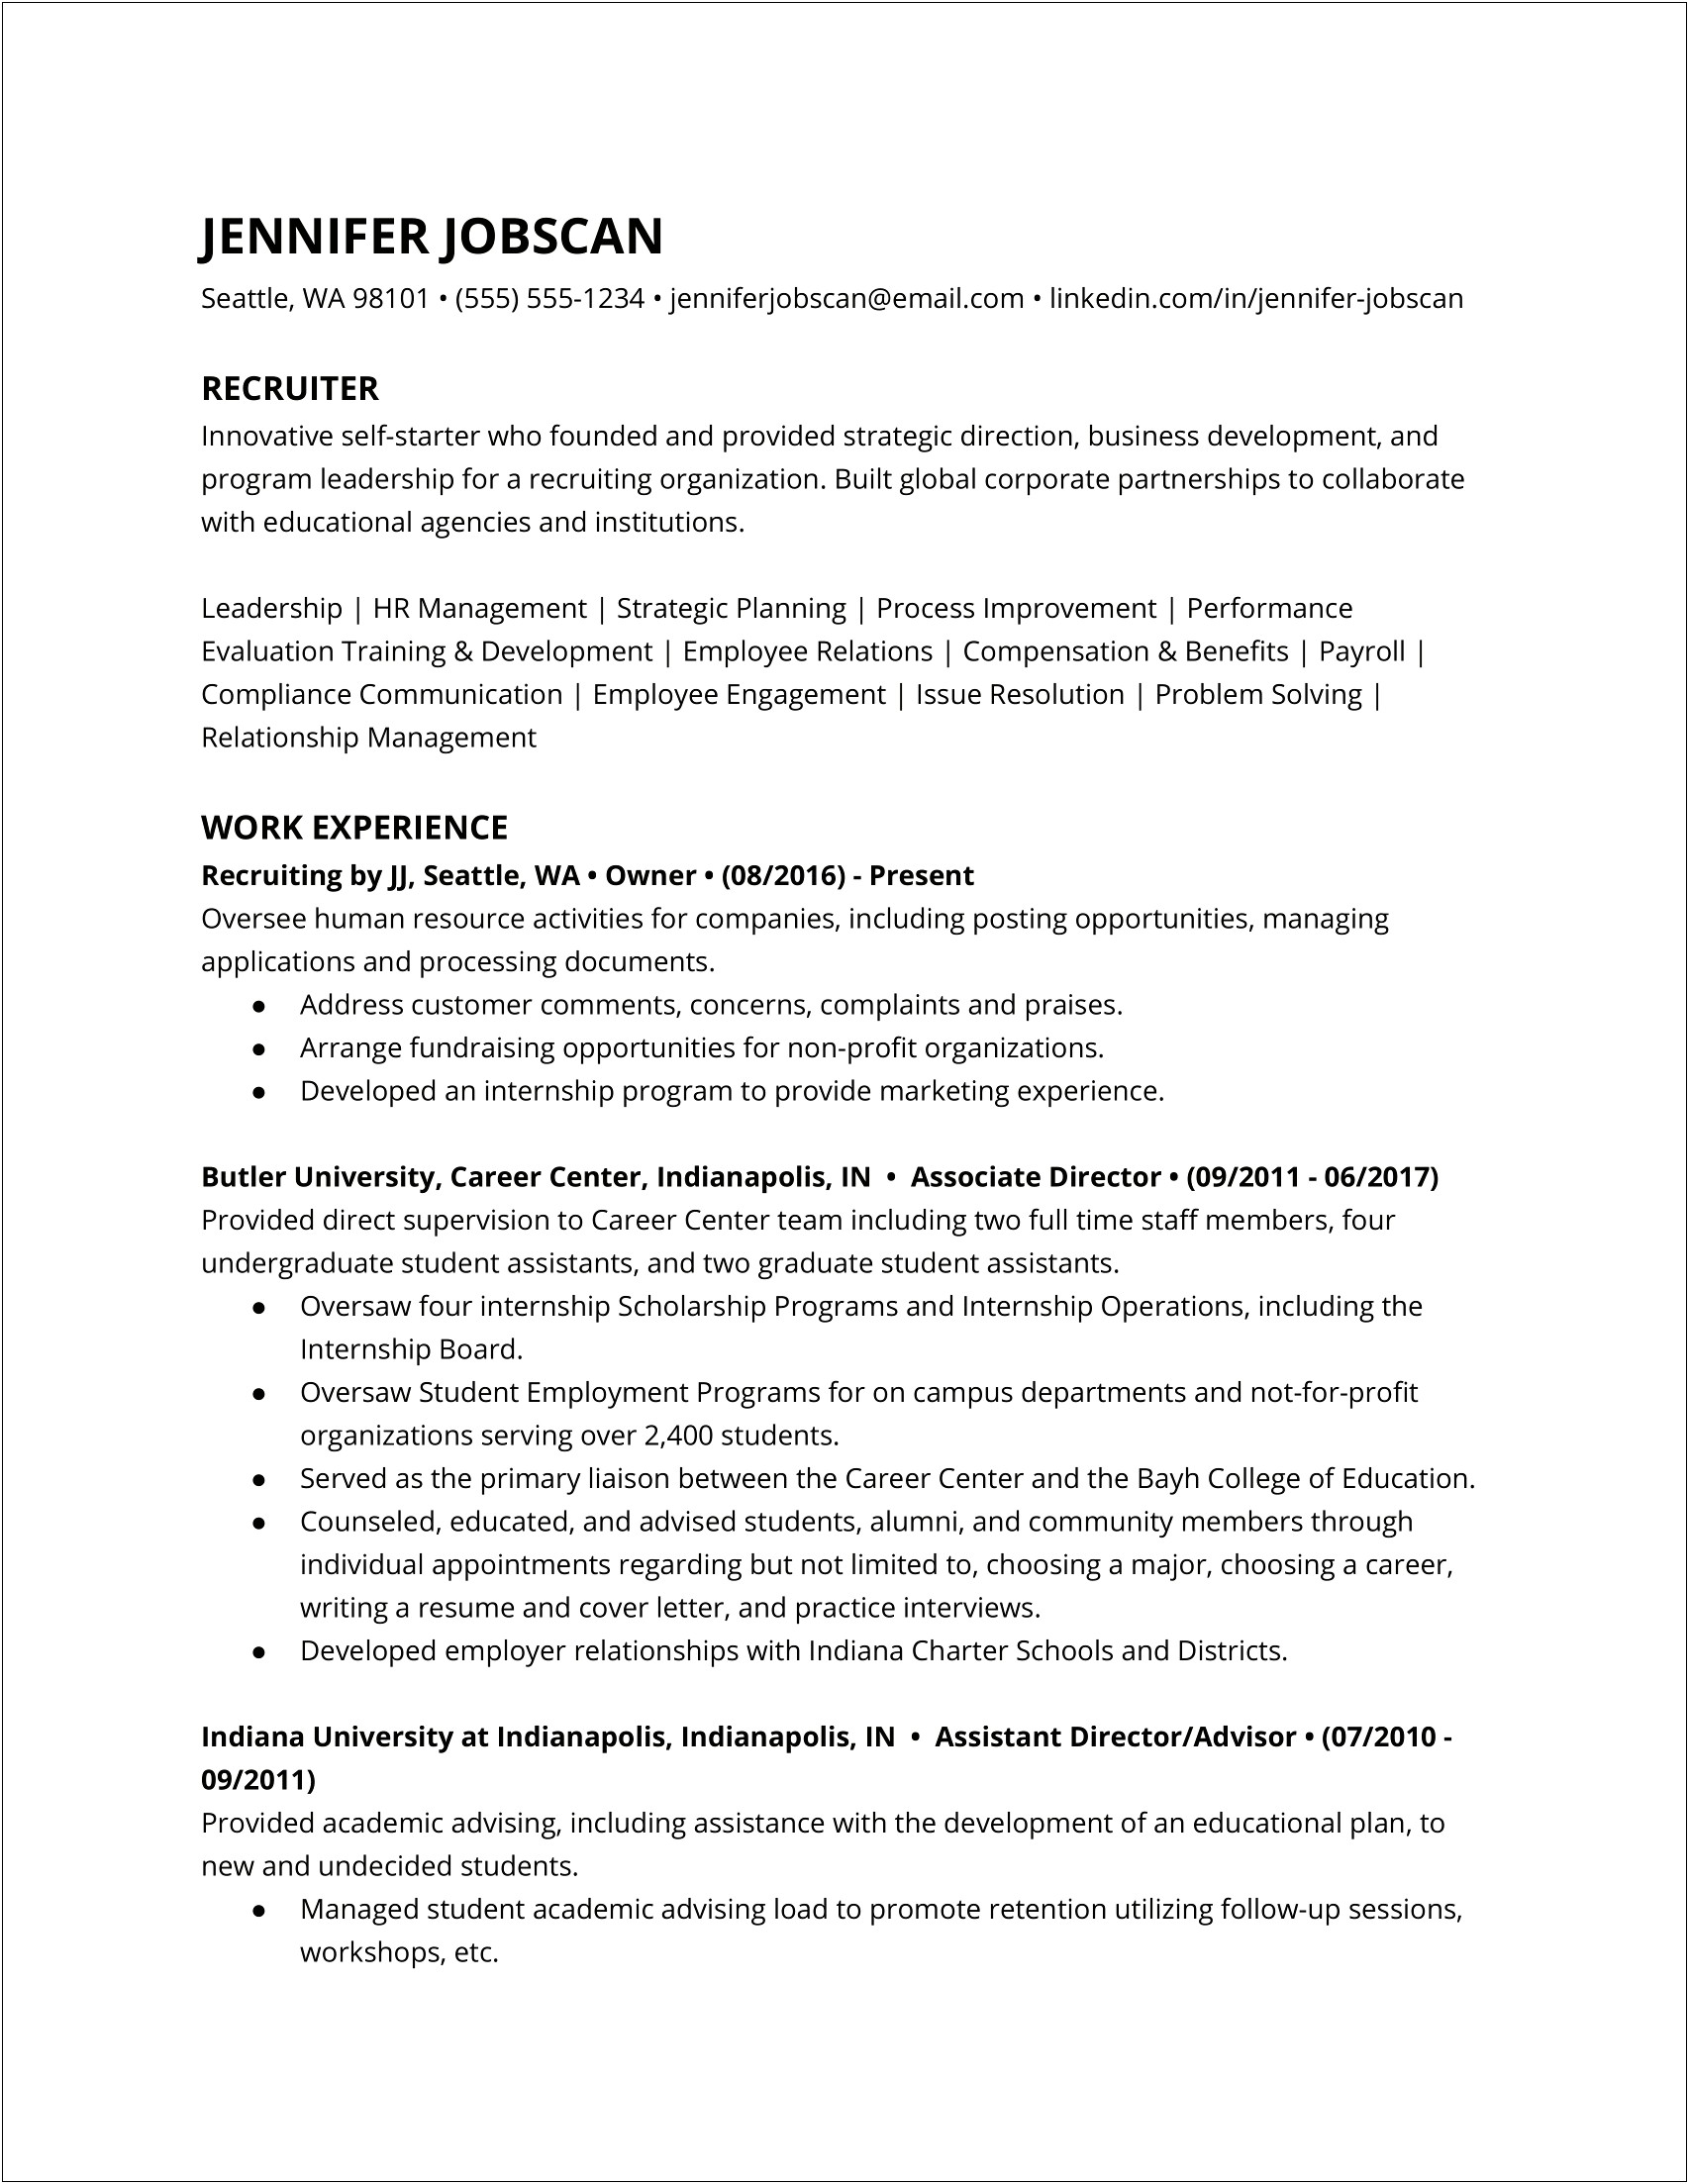 Sample Resume For Recruiter Without Experience